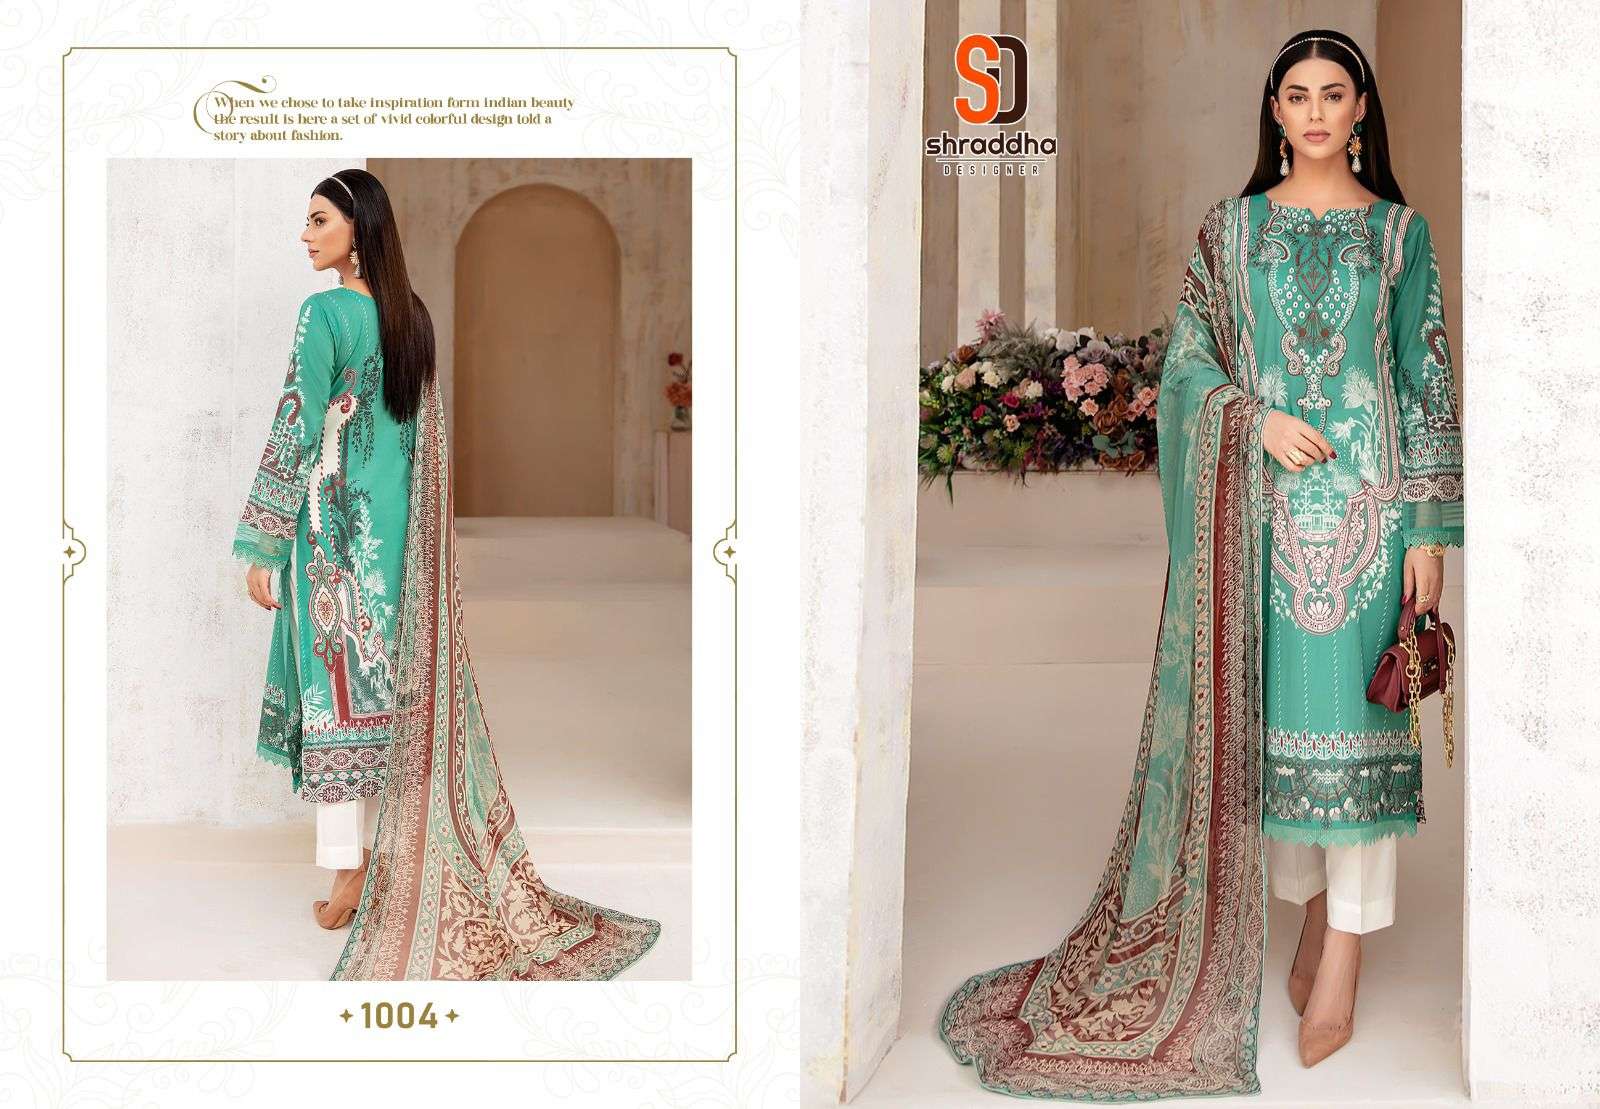 Ramsha Vol-1 By Shraddha Designer 1001 To 1004 Series Beautiful Pakistani Suits Colorful Stylish Fancy Casual Wear & Ethnic Wear Lawn Cotton Embroidered Dresses At Wholesale Price